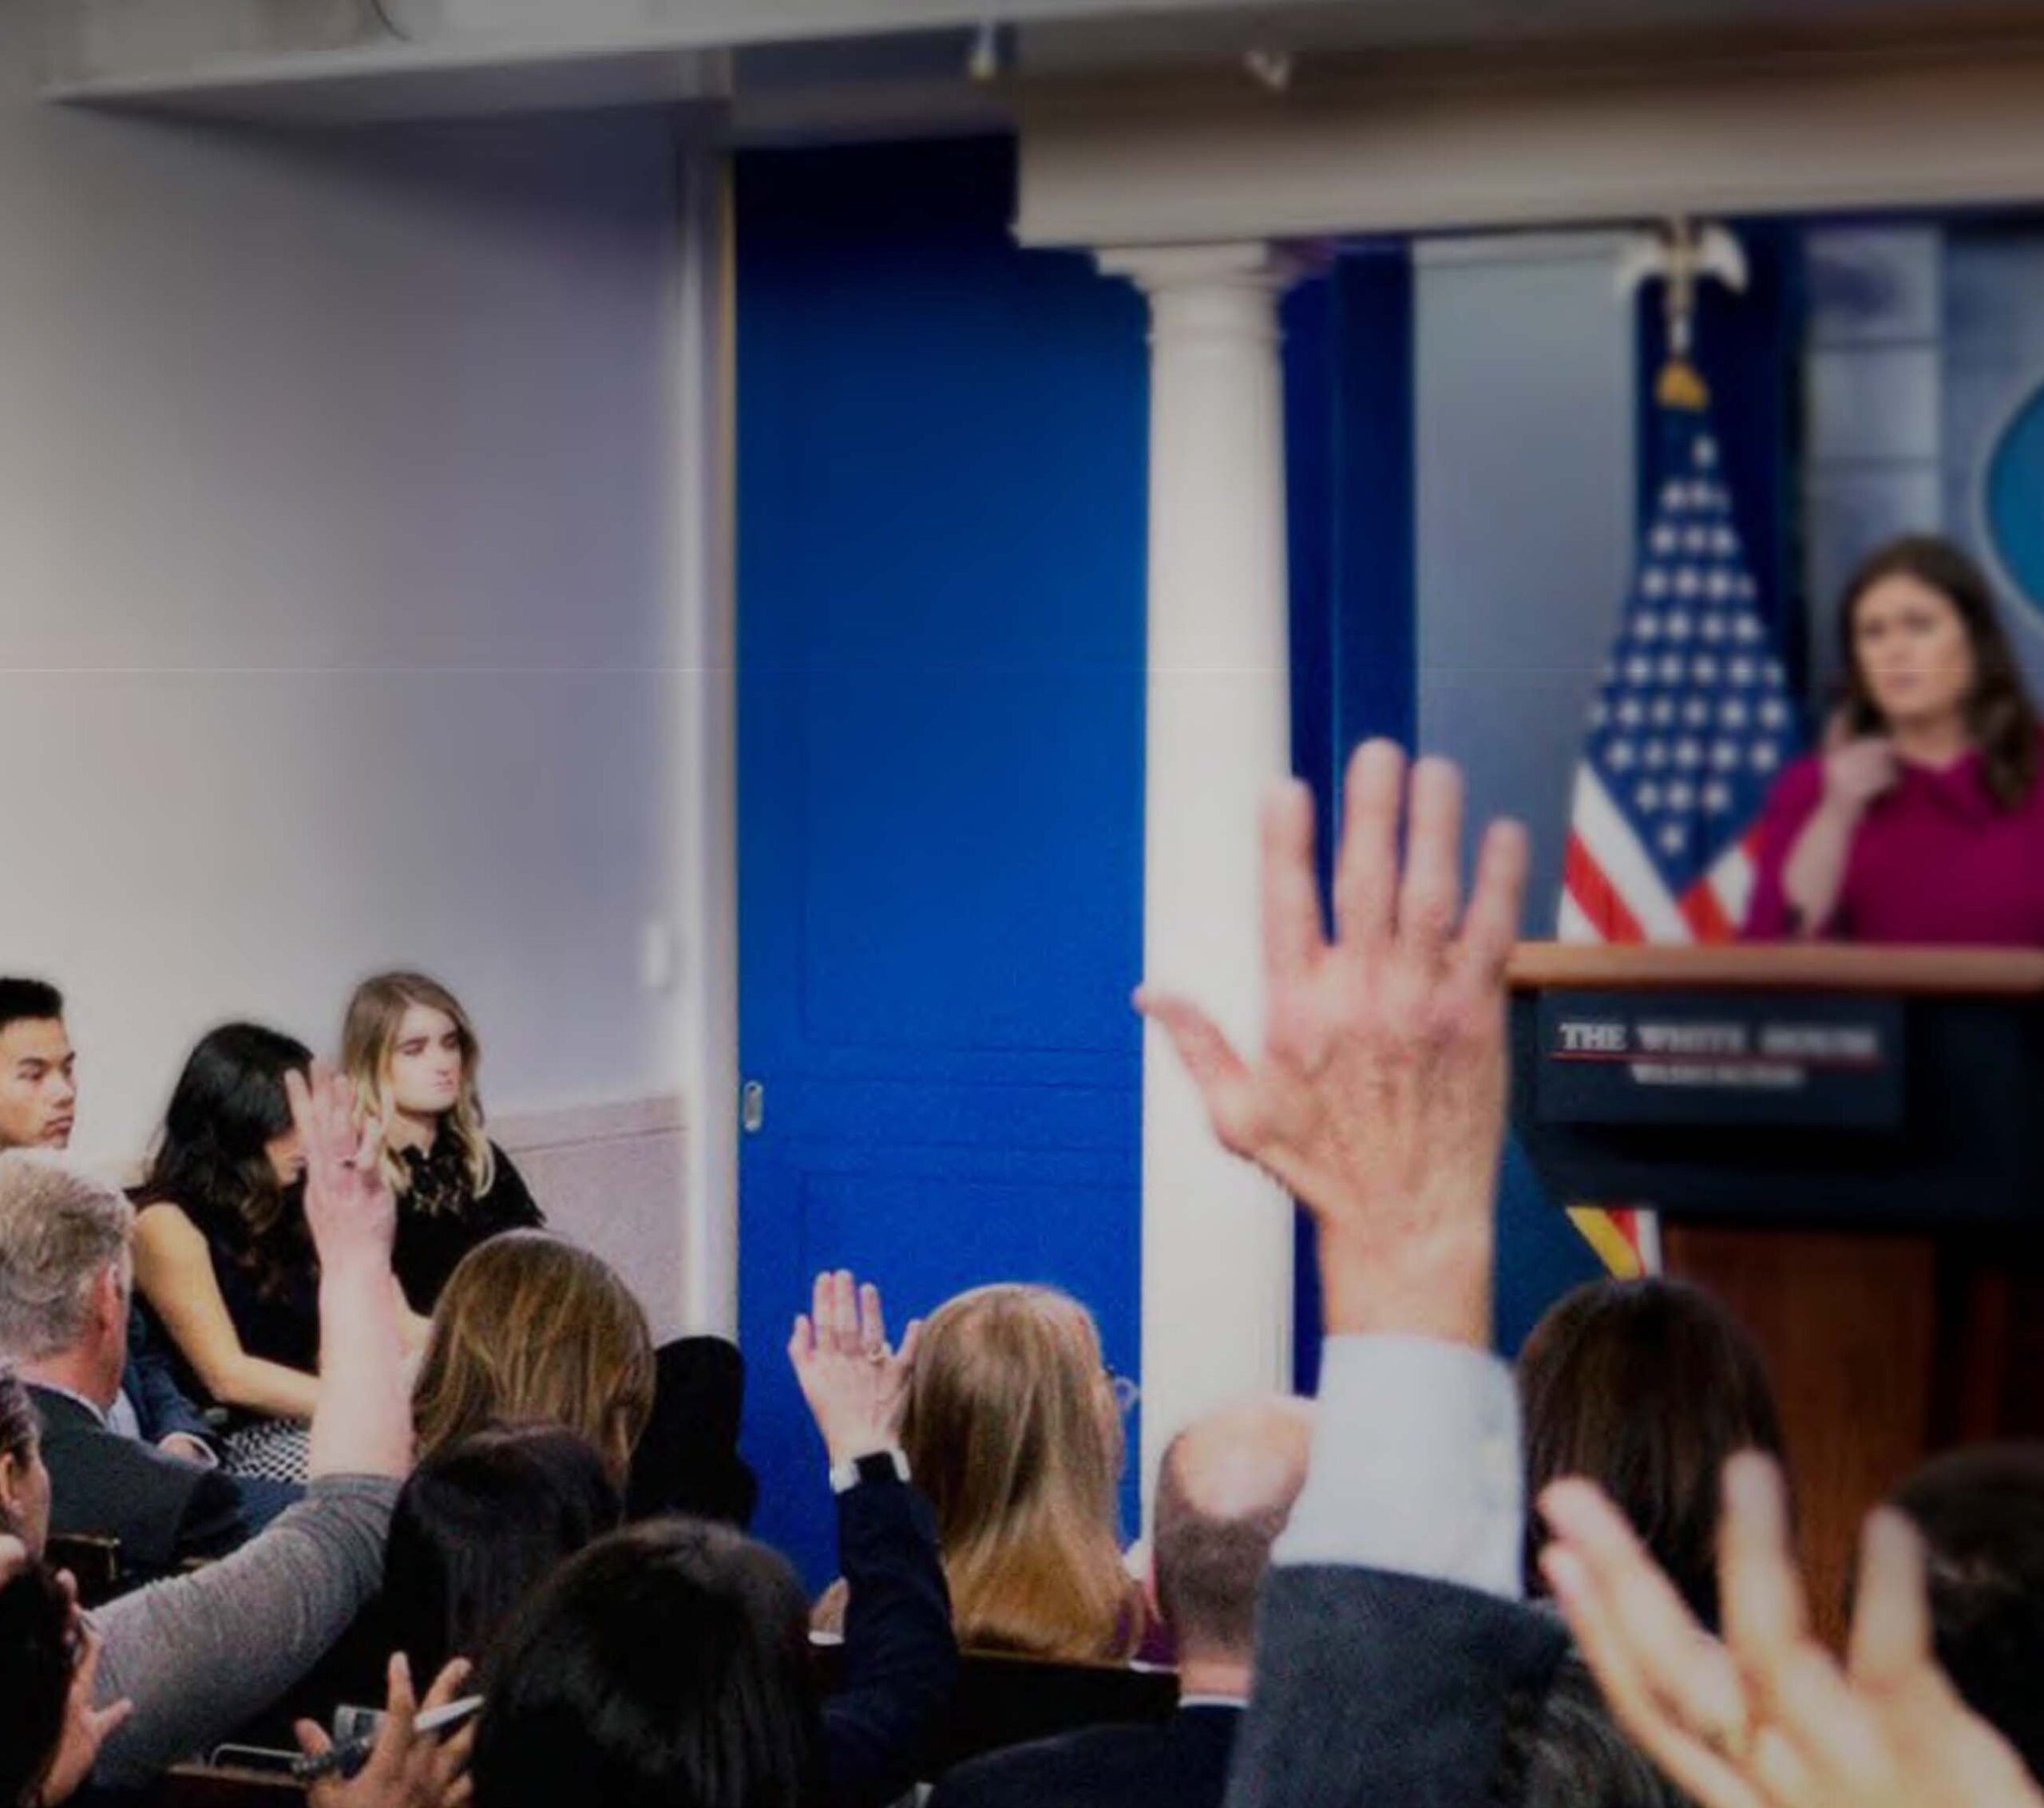 Reporters raise hands in the White House press room.